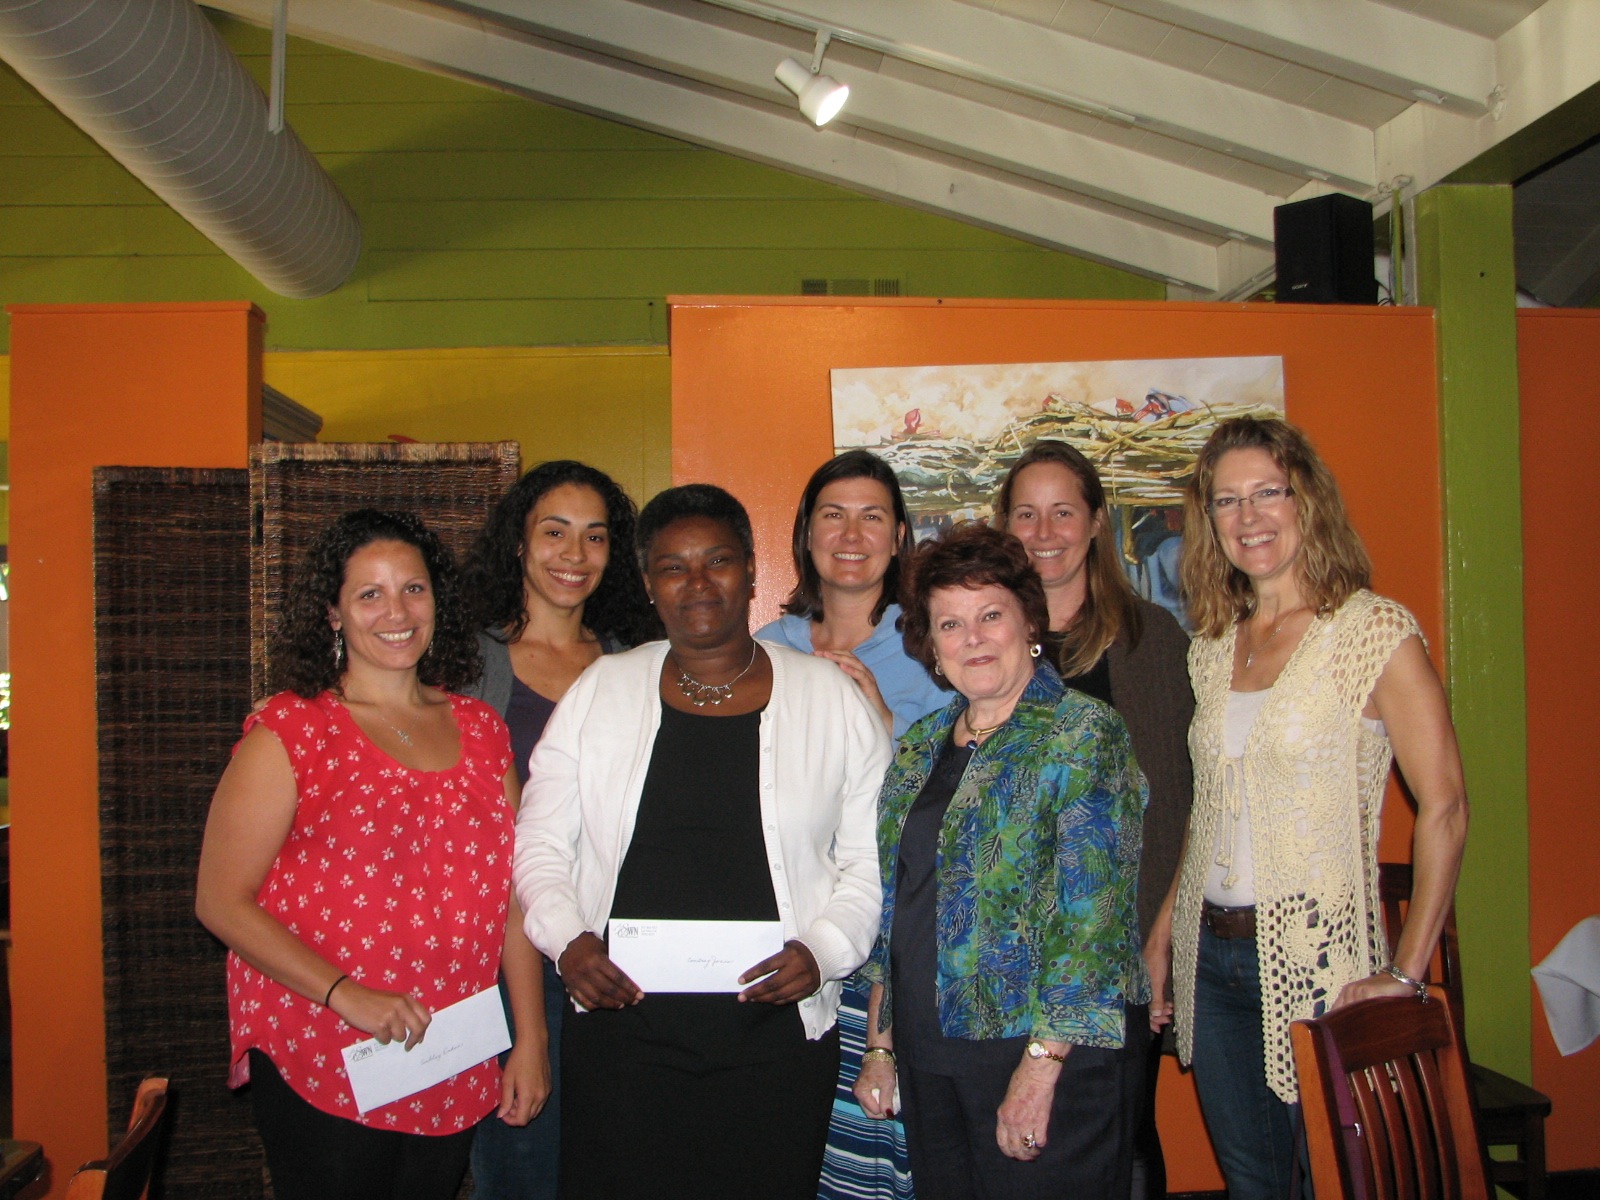 Scholarship winners (l. to r.) Ashley Erden, Sabrina Bussell, Courtnay Jones with Scholarship committee Christine Womack, Alyce Thorp, AJ Fudge and Monica Randeen. (not pictured Scholarship winner Jimi McFarlin)